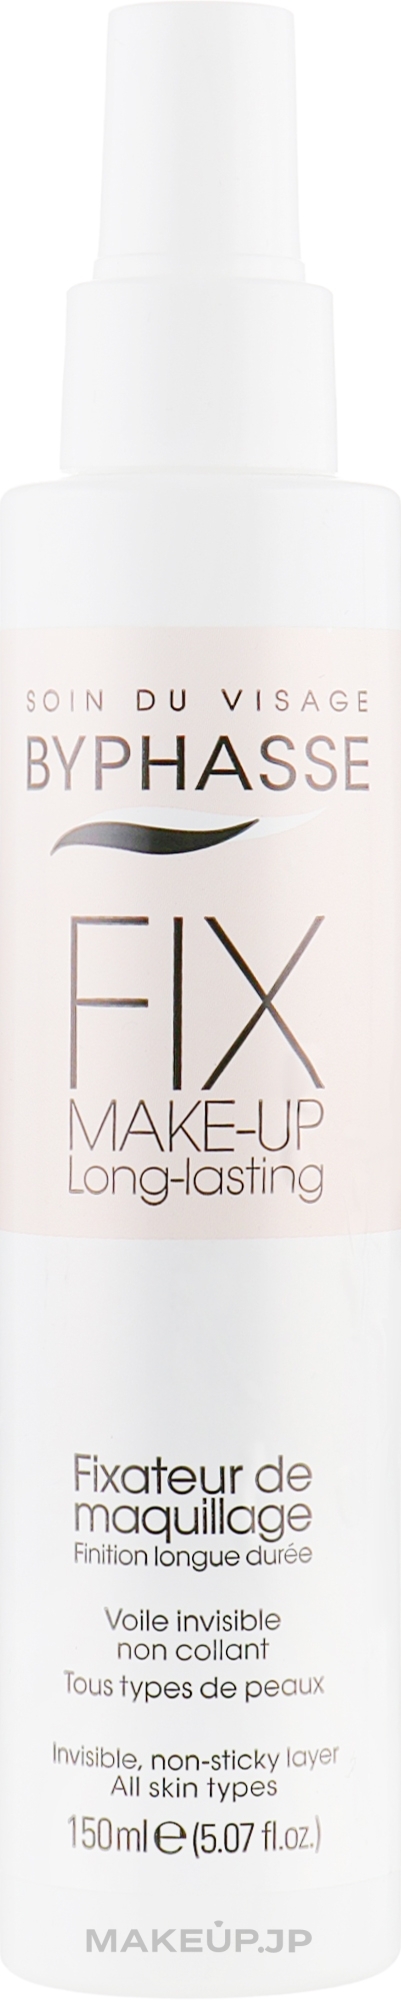 Makeup Setting Mist - Byphasse Mists Fix Make-up Long Lasting All Skin Types — photo 150 ml